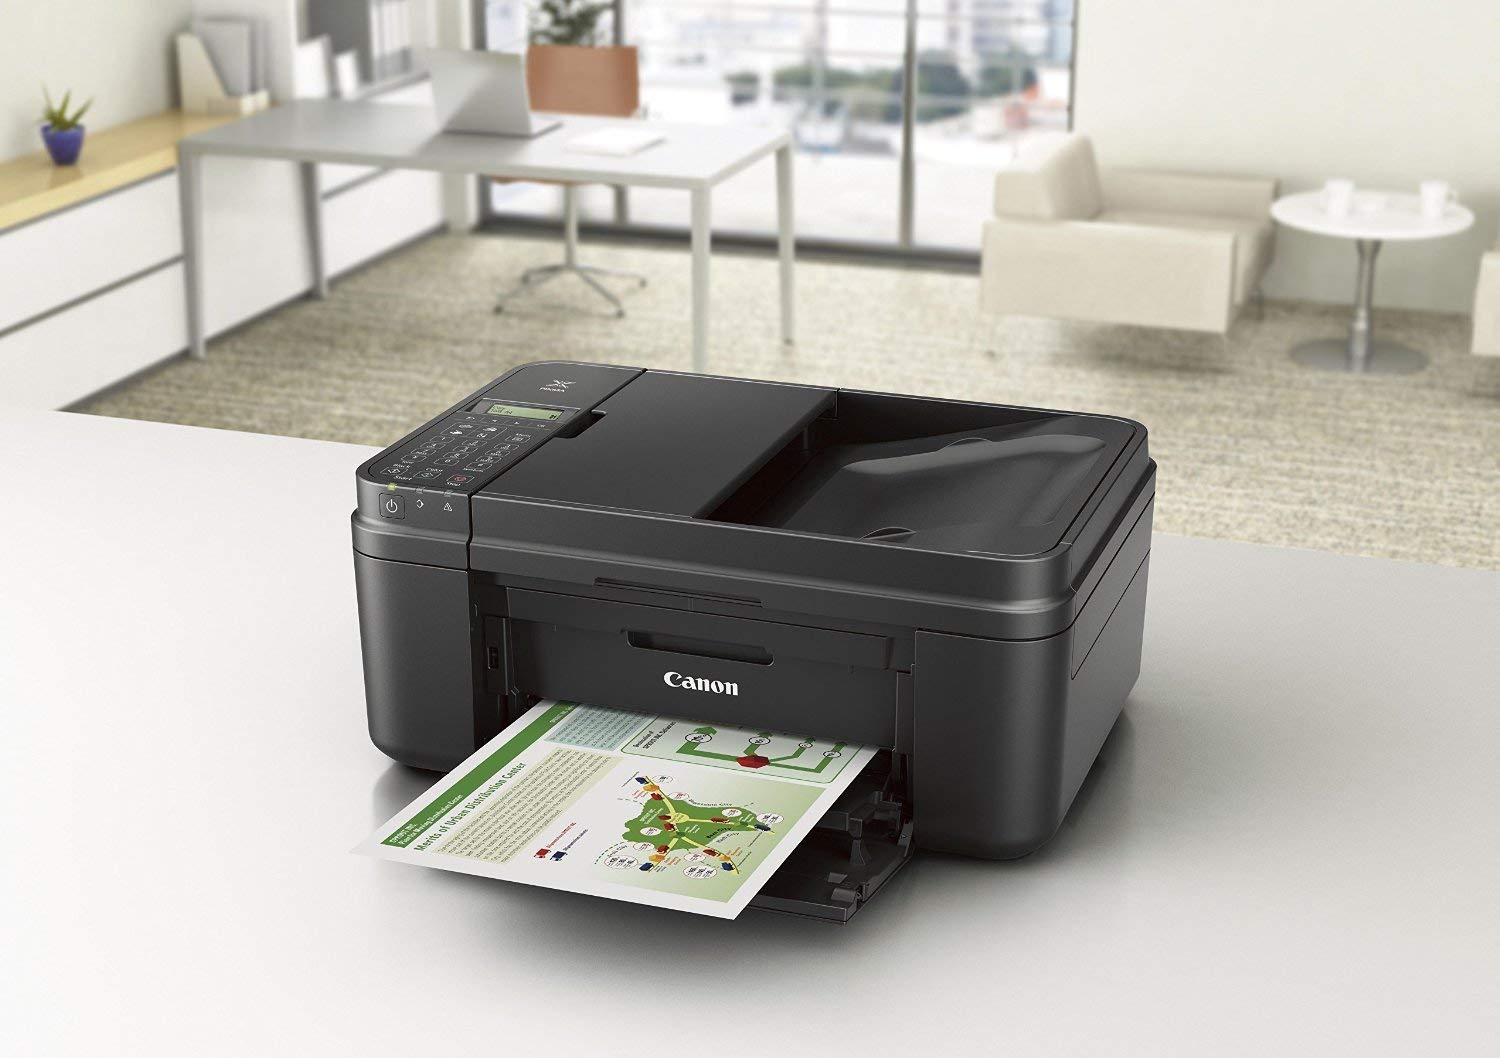 Canon PIXMA MX490 Wireless Office All-in-One Inkjet Printer/Copier/Scanner/Fax Machine - image 5 of 5